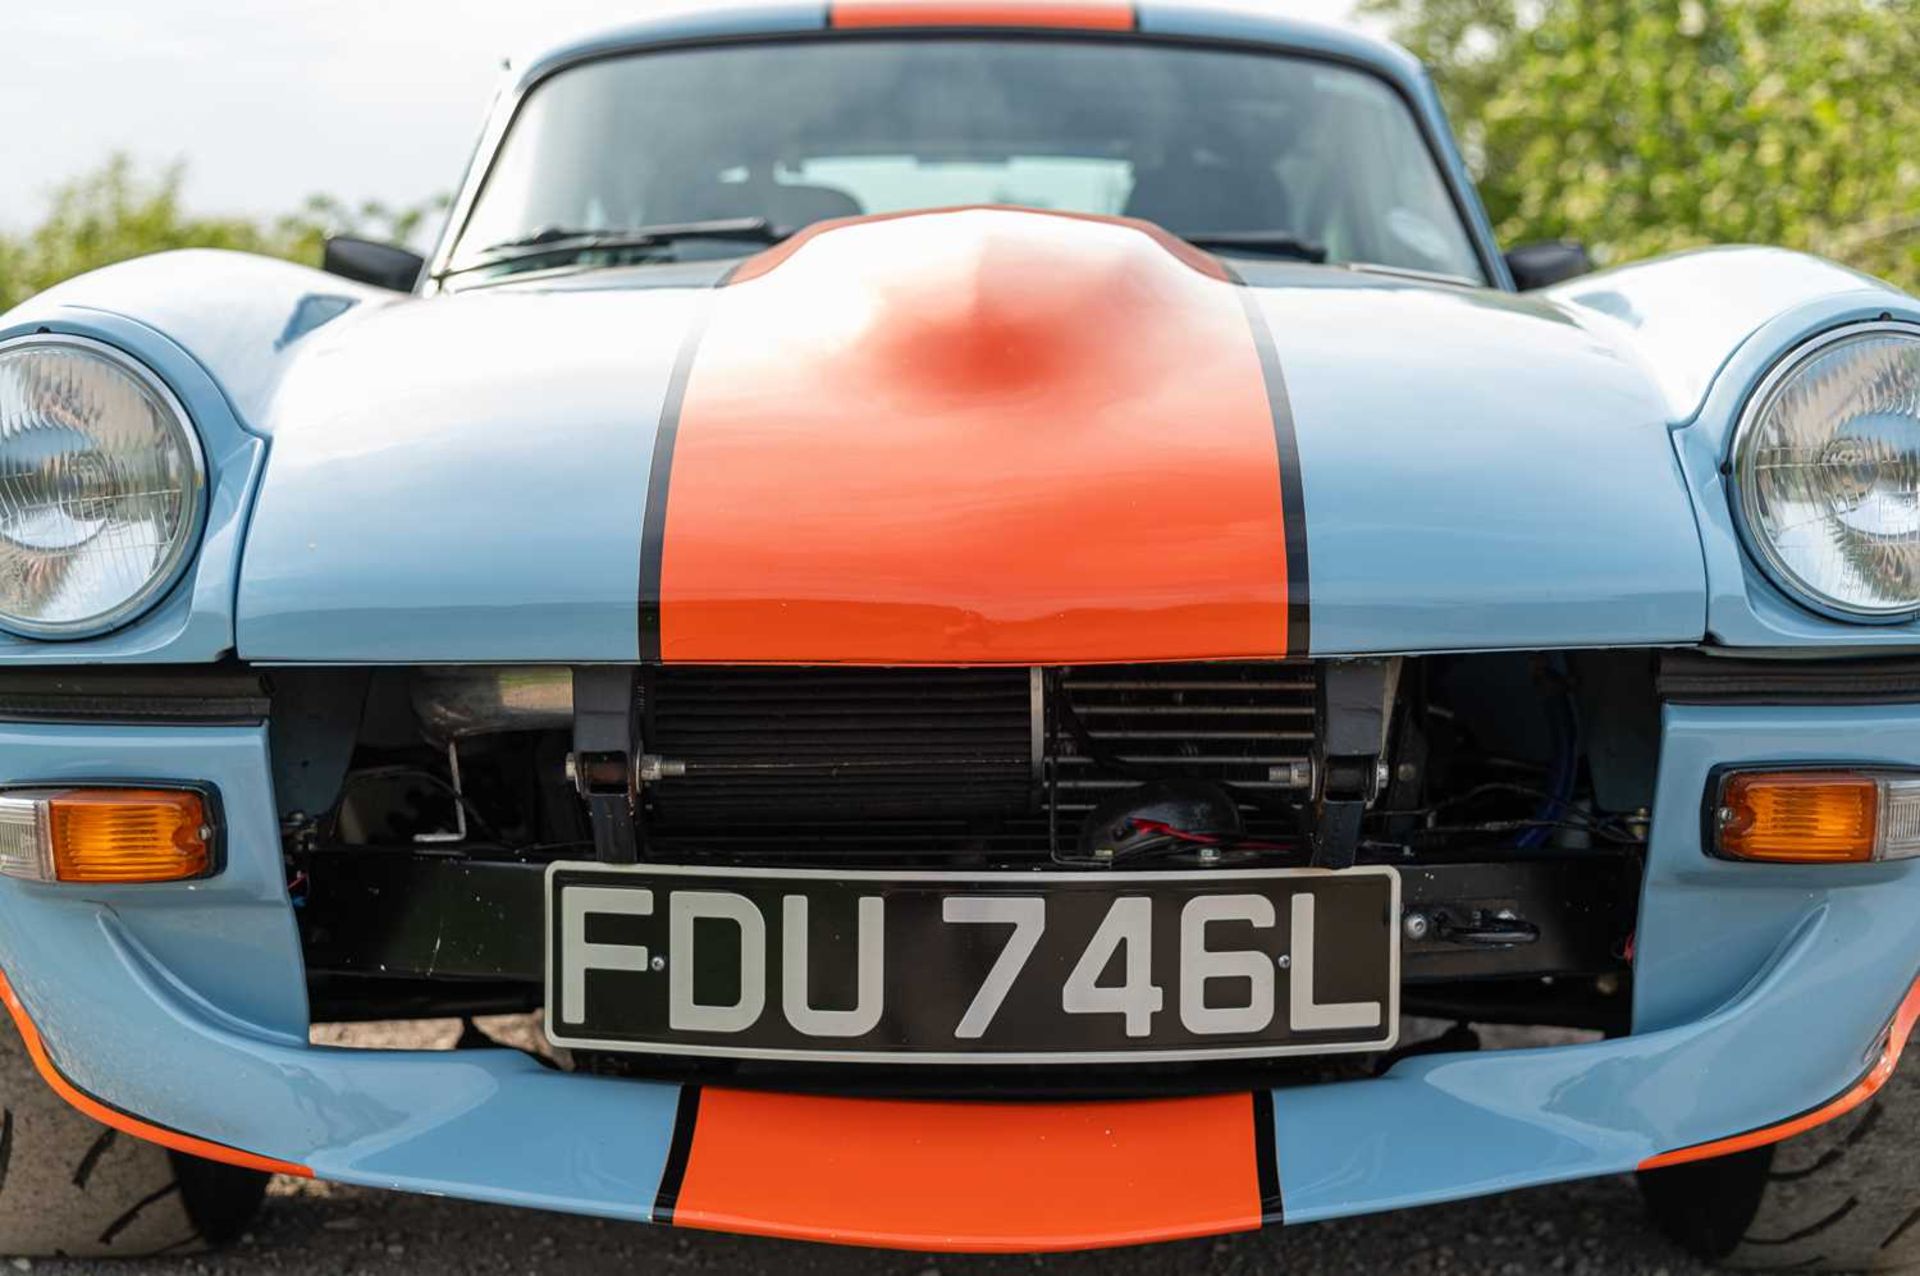 1973 Triumph GT6  ***NO RESERVE*** Presented in Gulf Racing-inspired paintwork, road-going track wea - Bild 28 aus 65